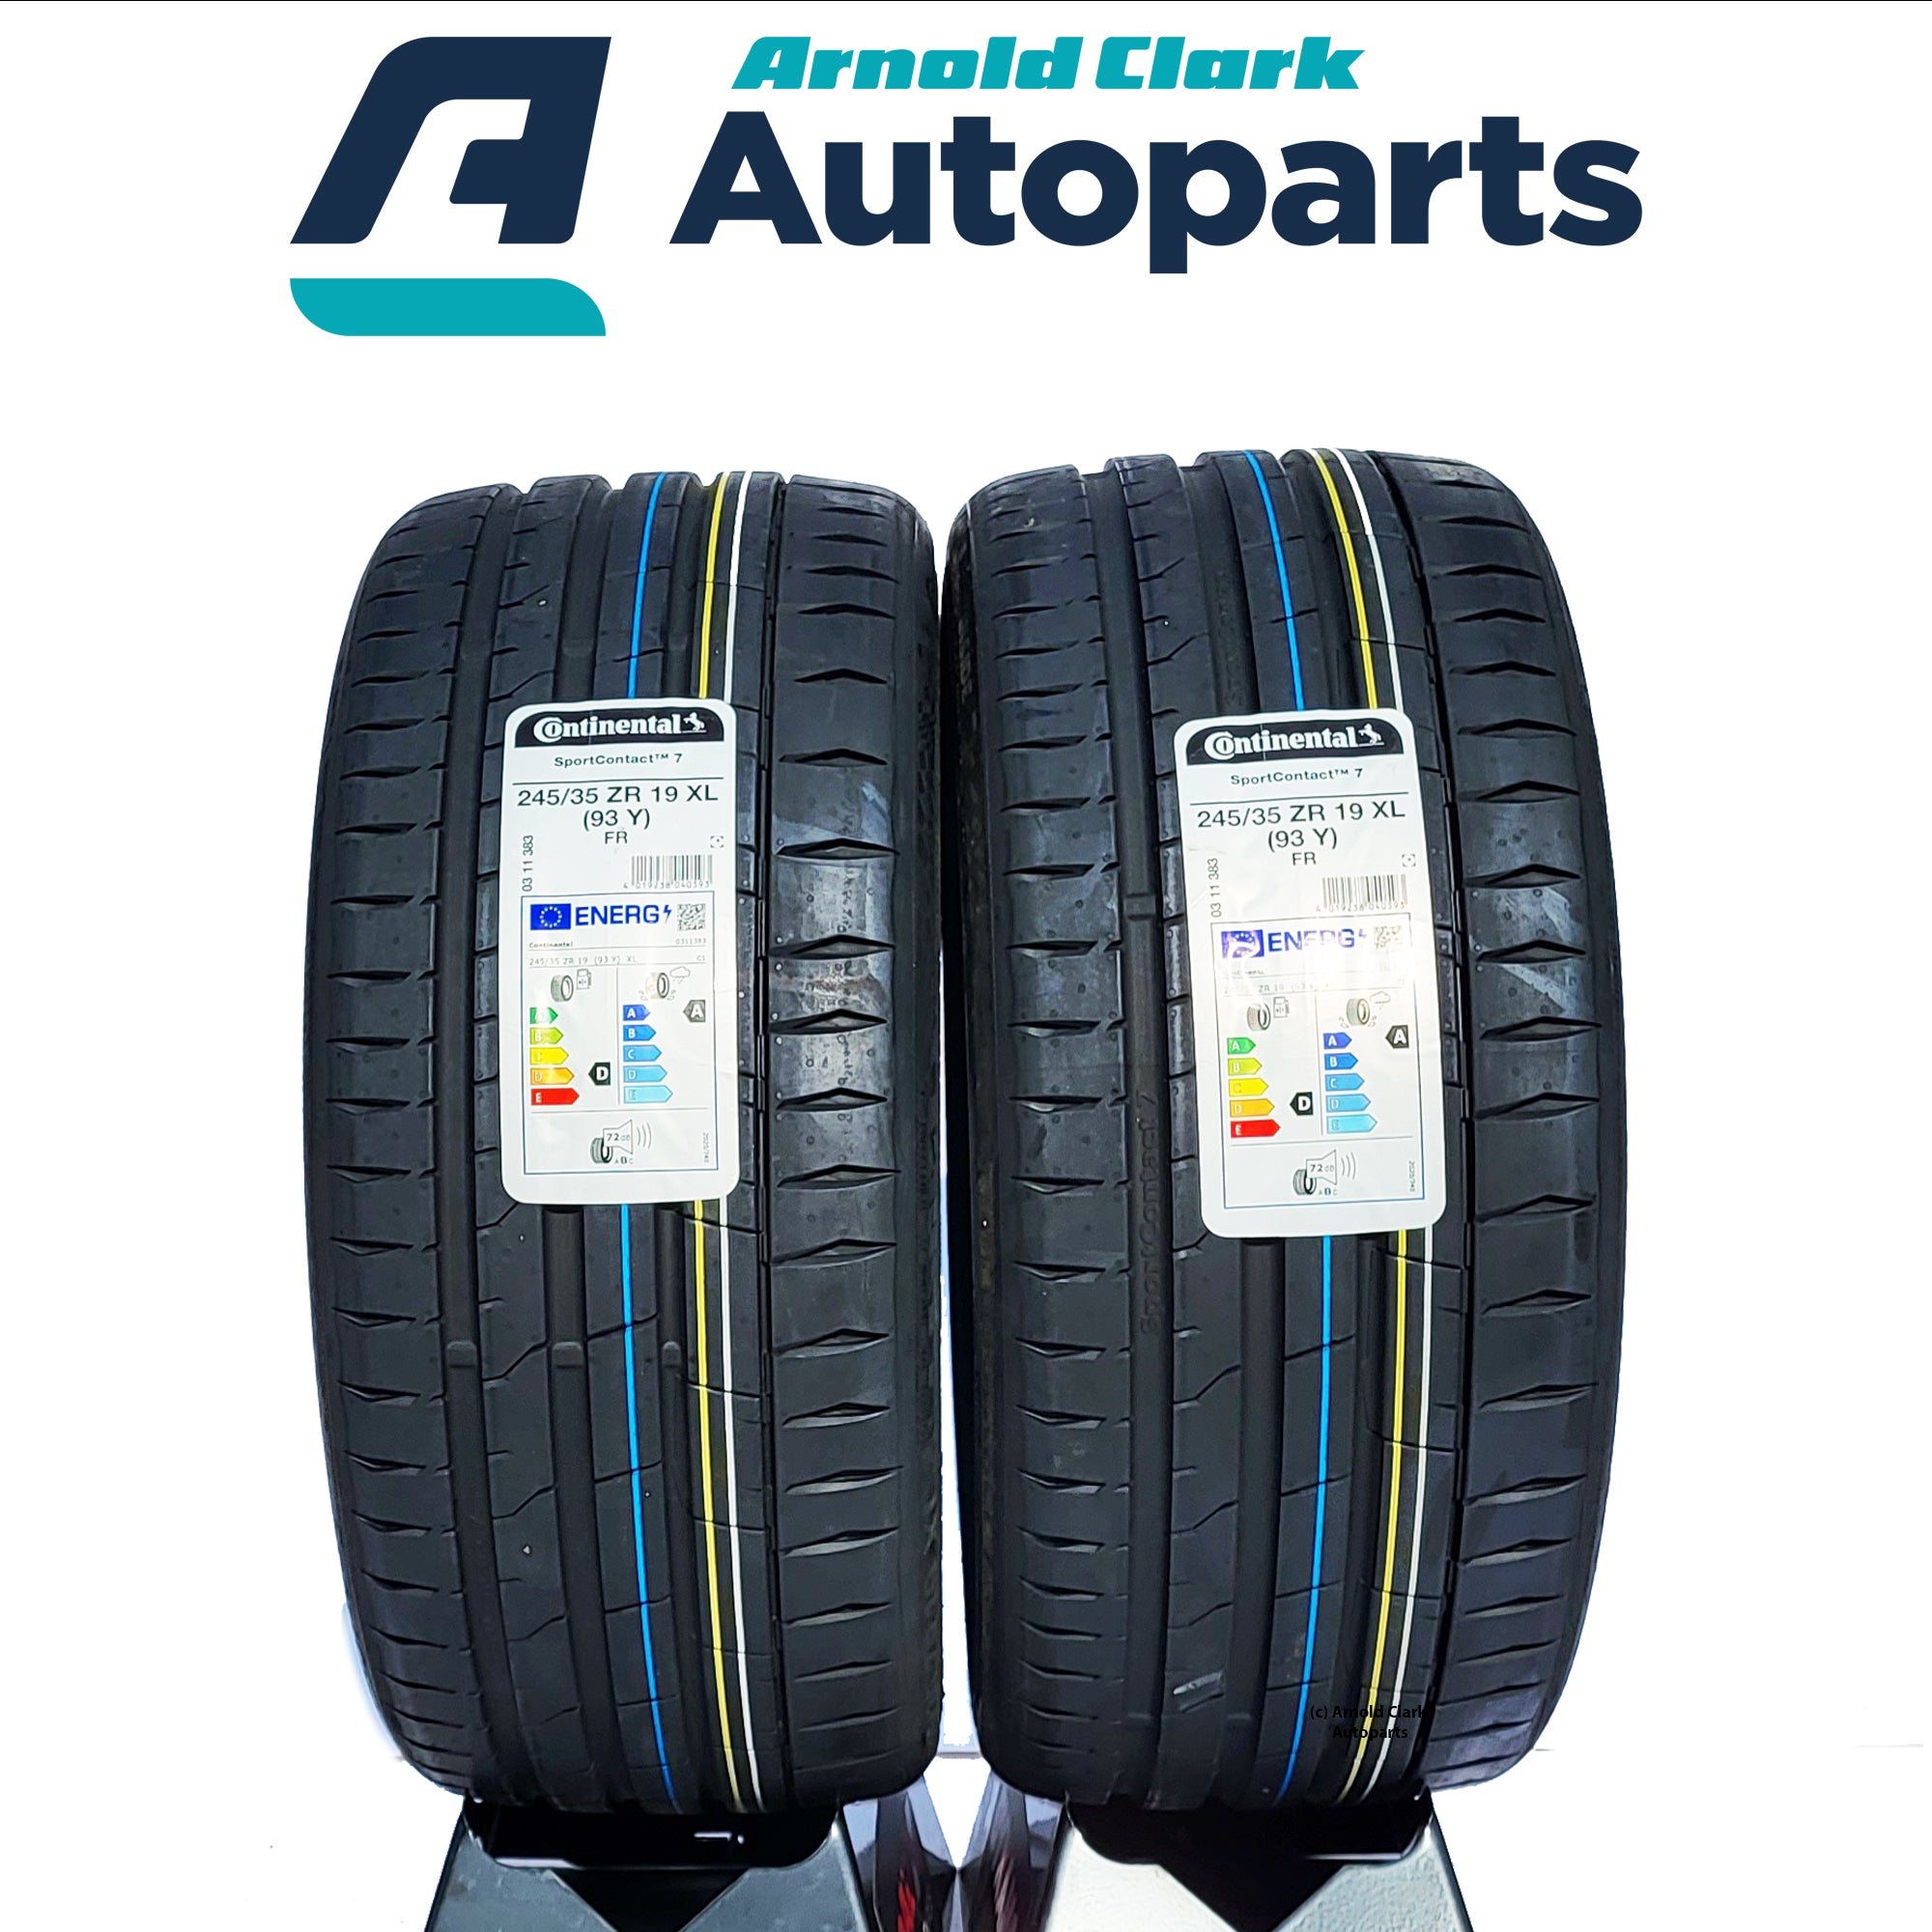 Tyres 7 Pair Contact 93Y x2 19 Sport Continental 35 245